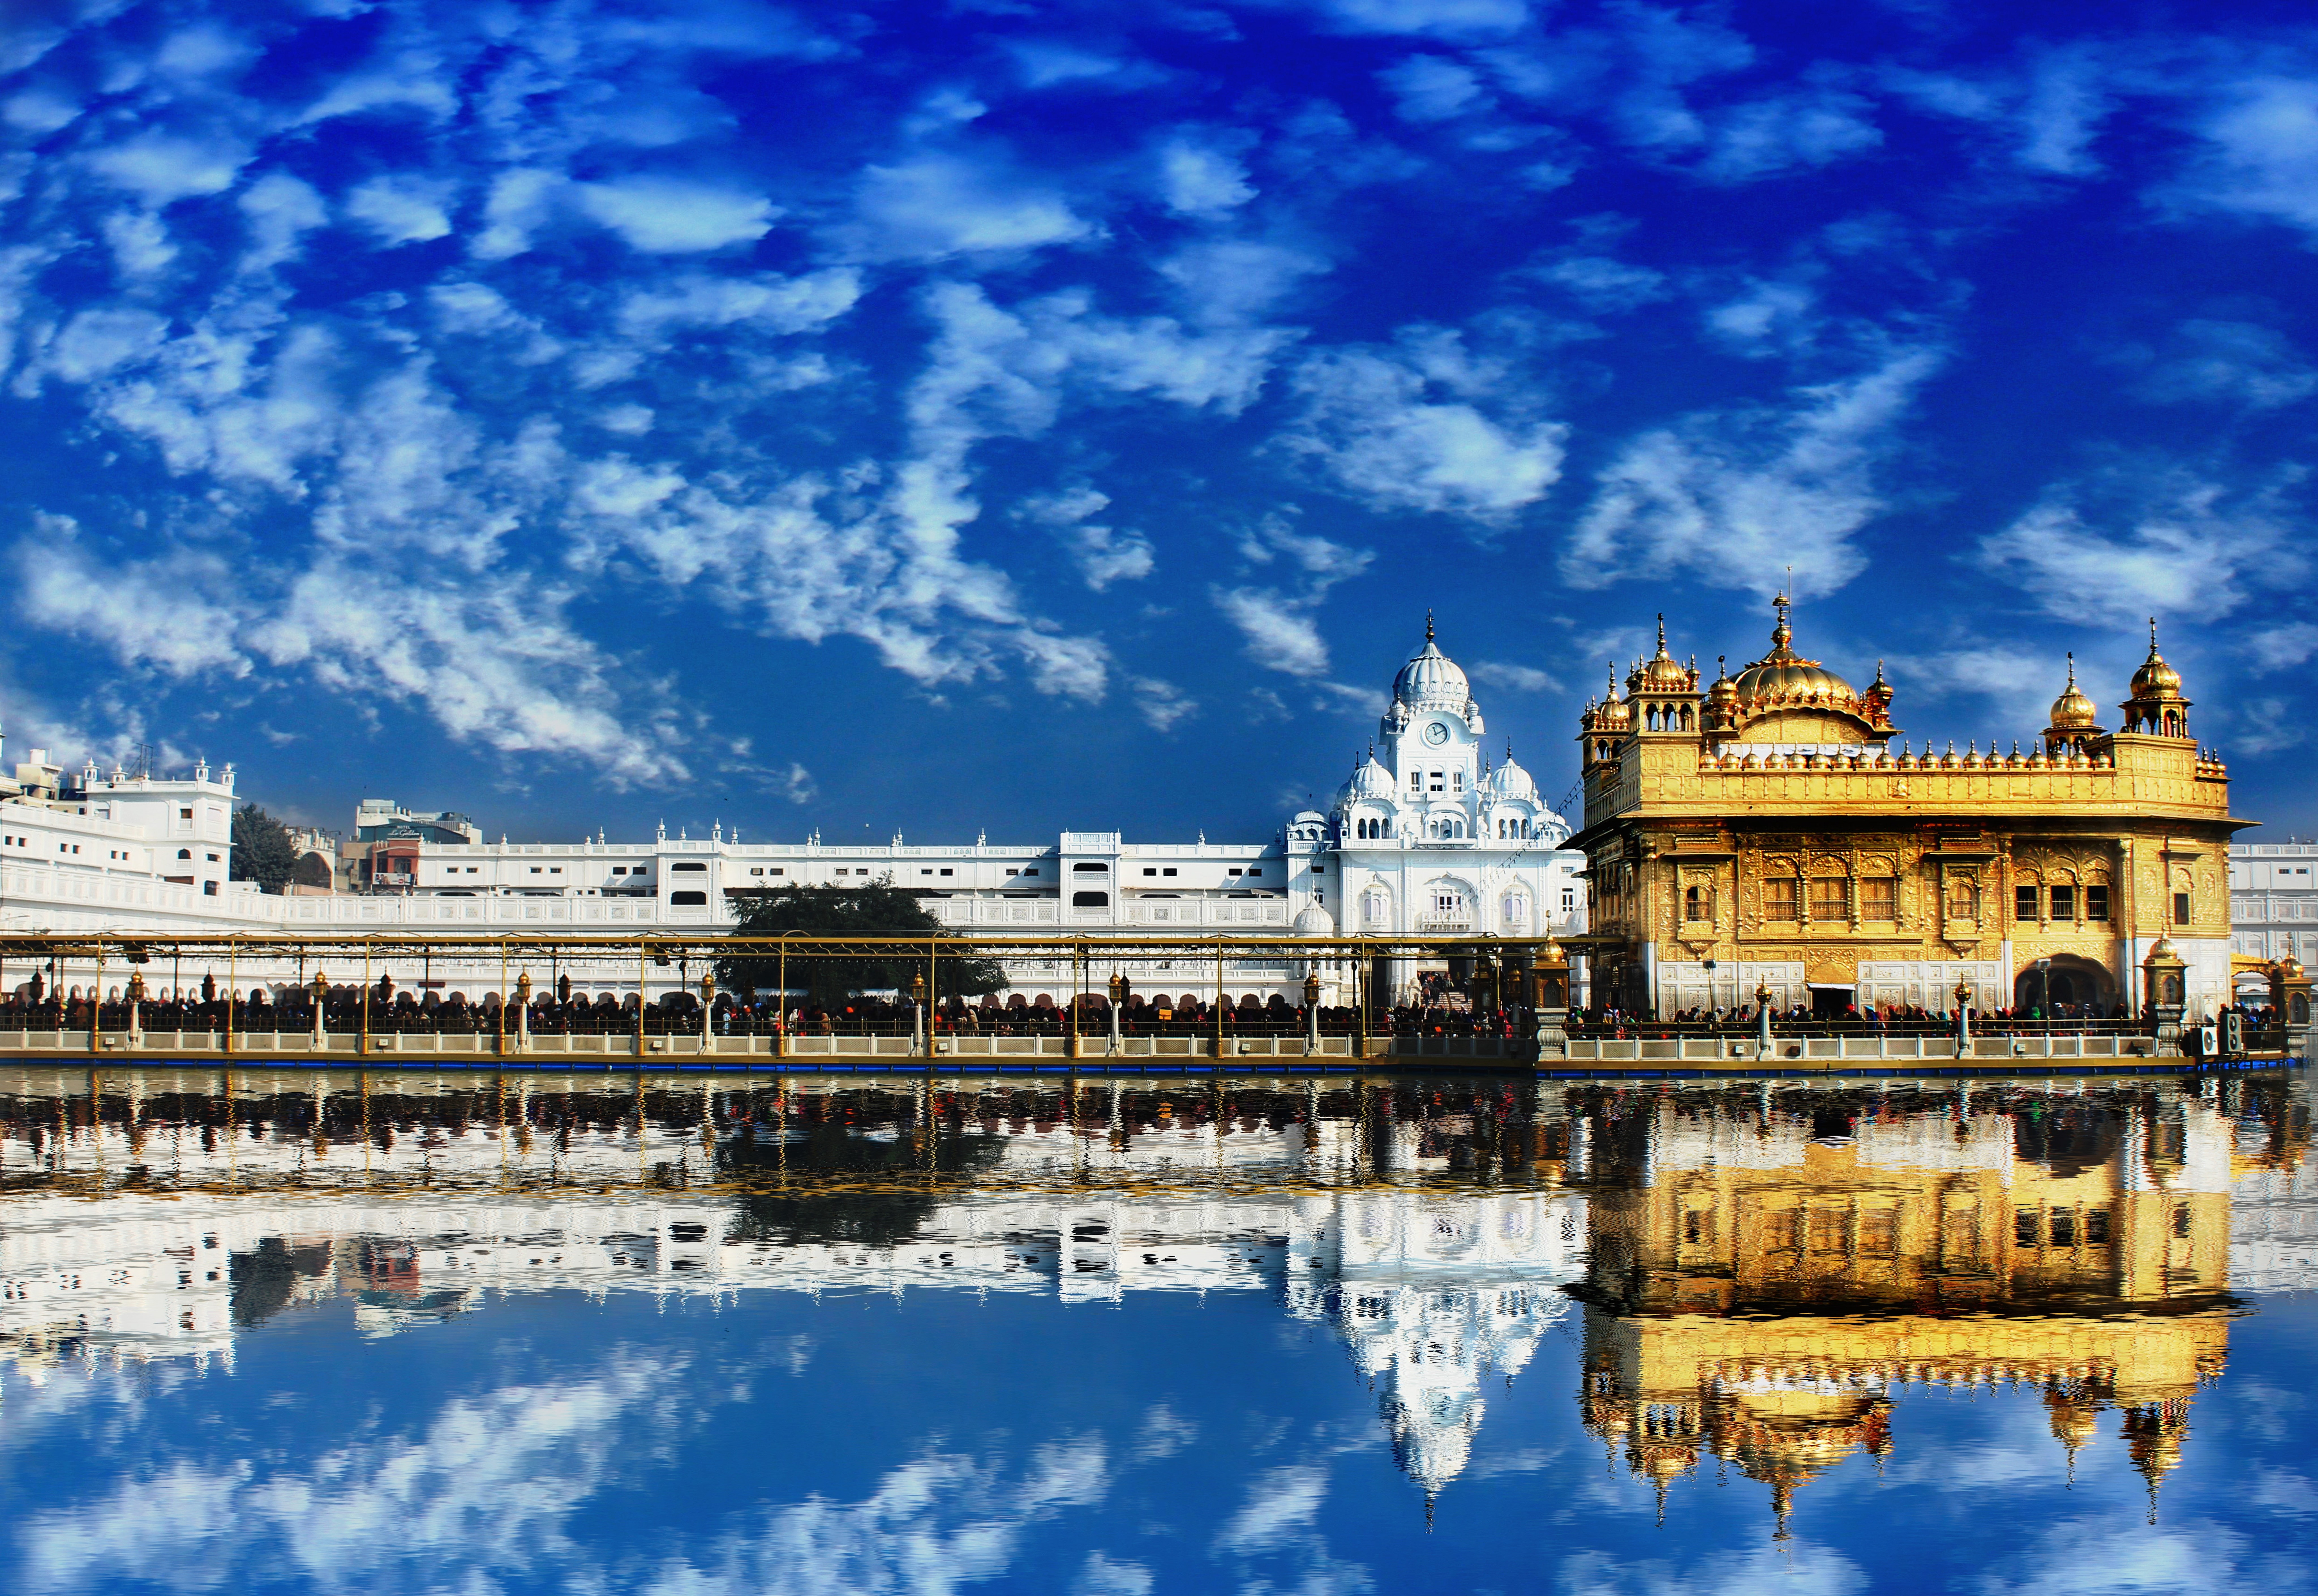 Himachal Harmony with Amritsar - a picturesque view of the mountains and the Golden Temple